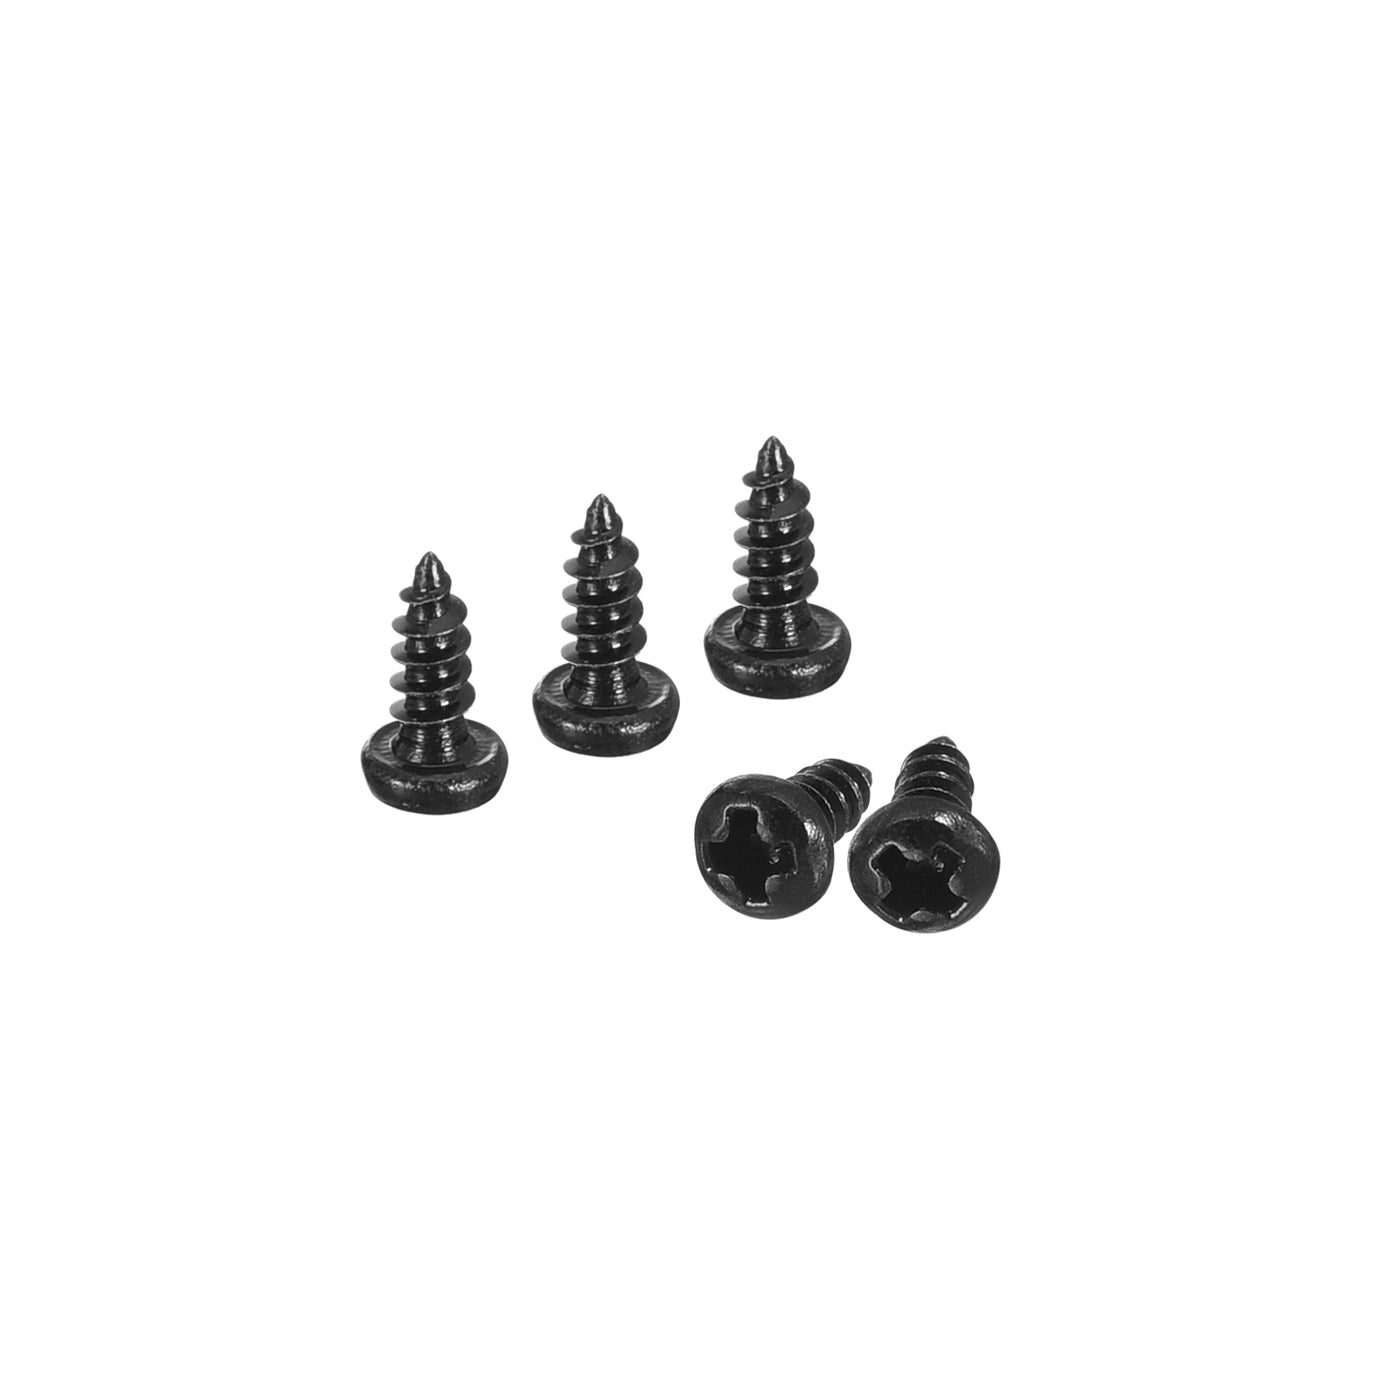 uxcell Uxcell #2 x 3/16" Phillips Pan Head Self-tapping Screw, 100pcs - 304 Stainless Steel Round Head Wood Screw Full Thread (Black)